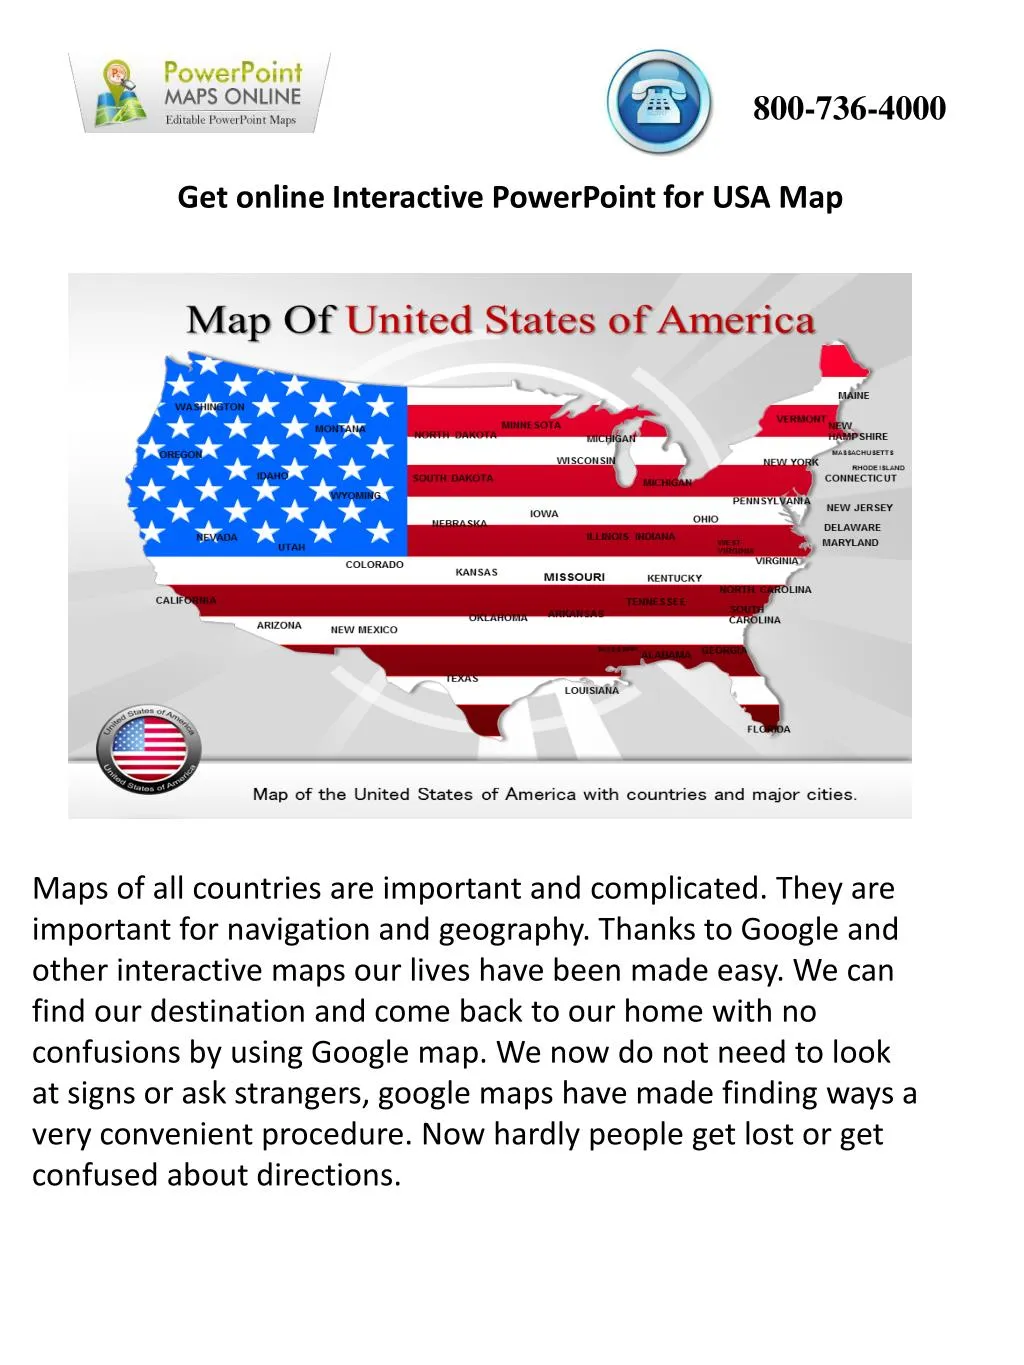 Ppt Get Online Interactive Powerpoint For Usa Map Powerpoint